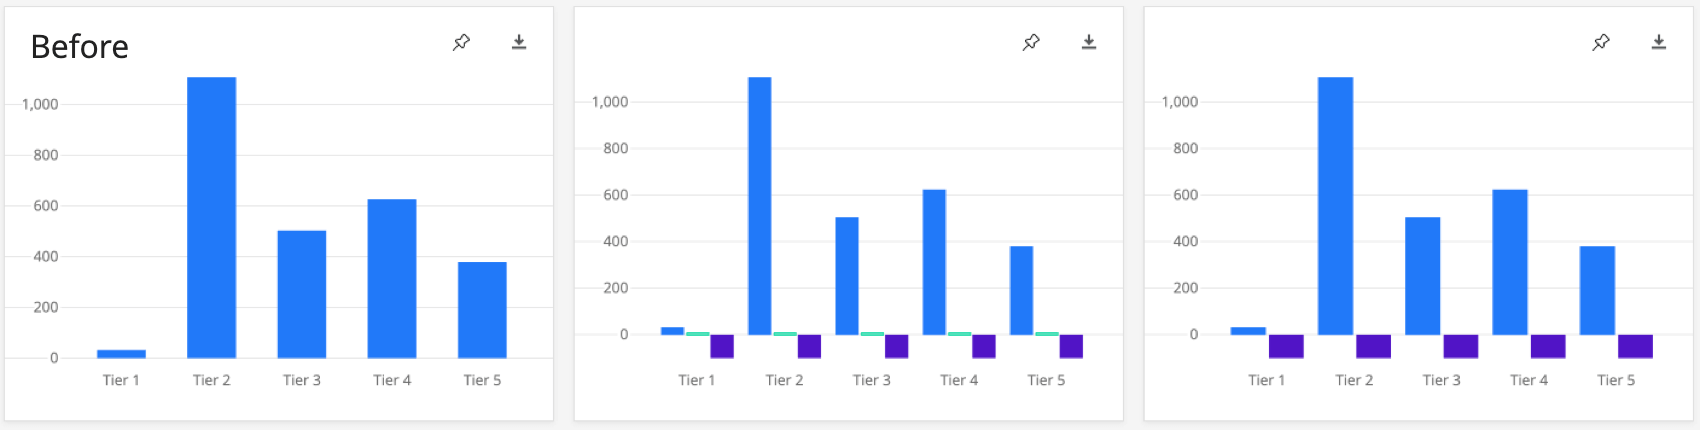 Bar charts before - bars vary in width